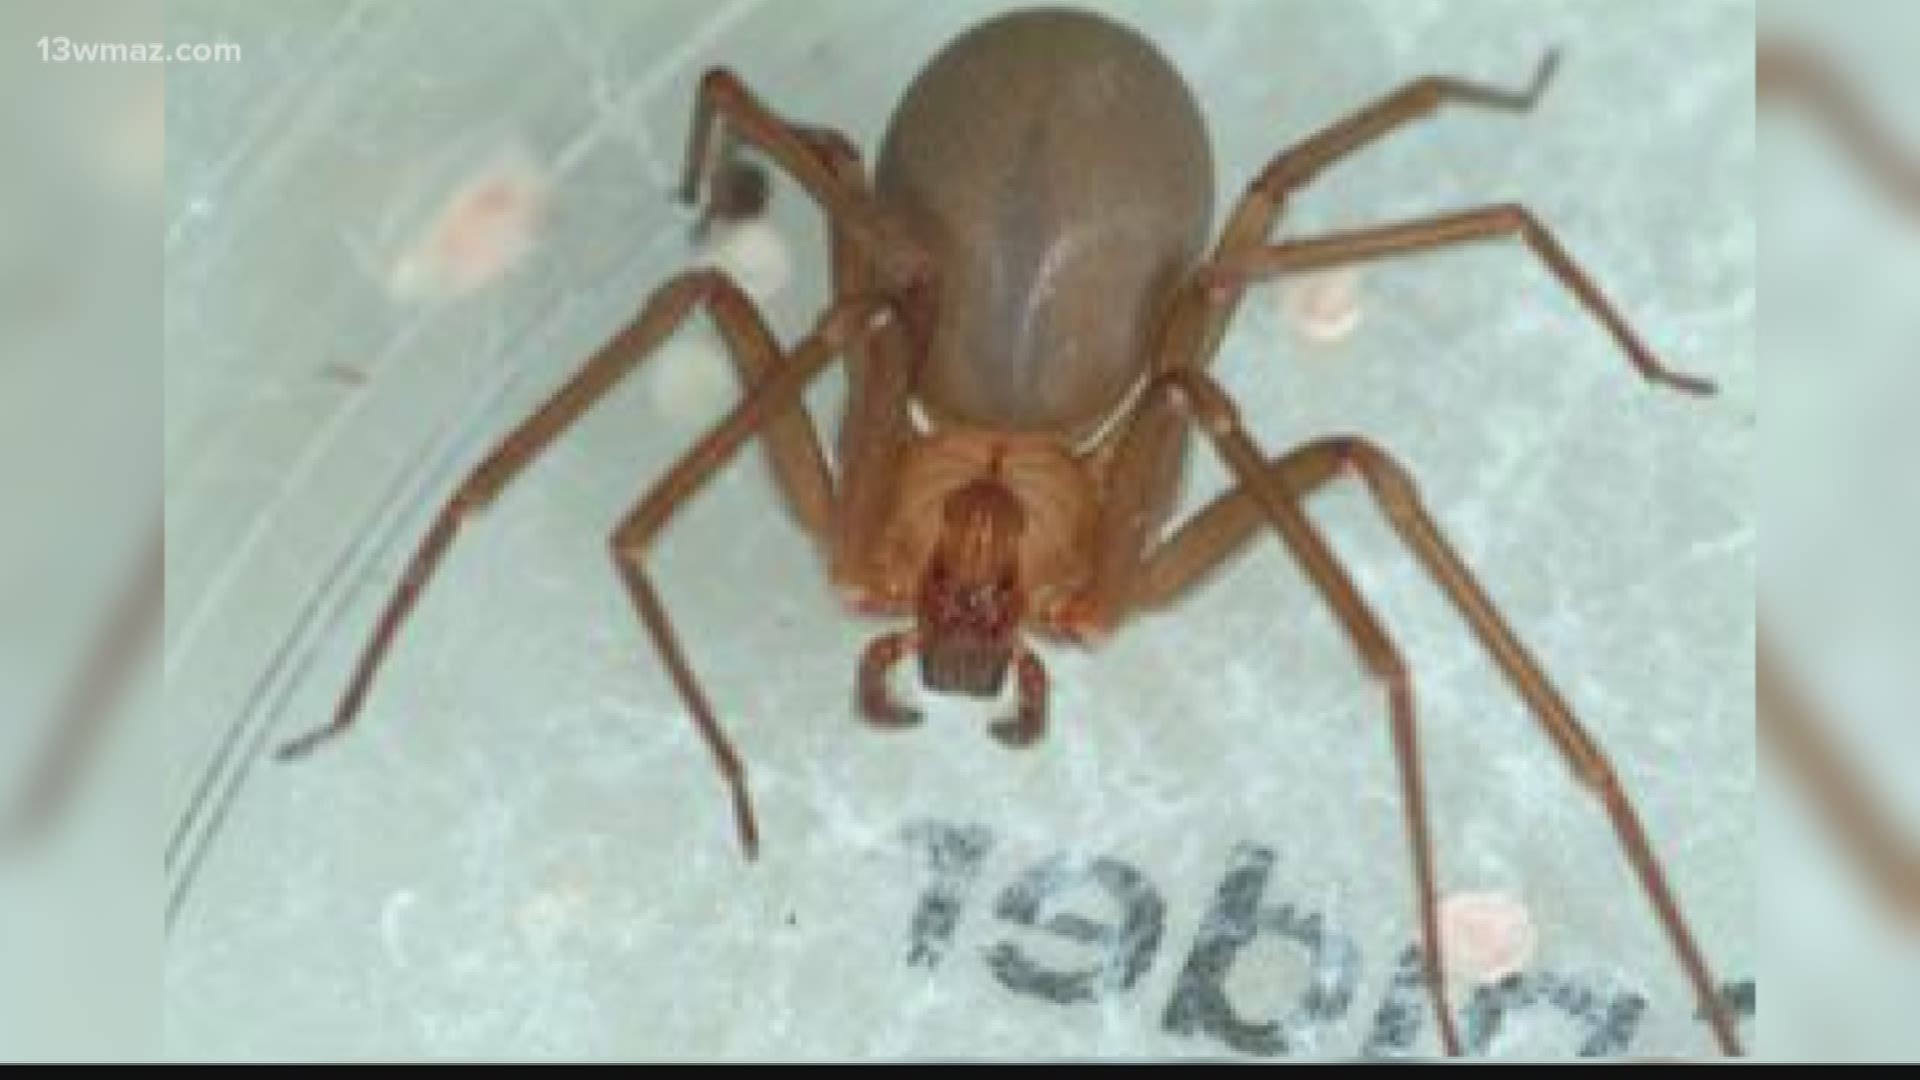 What You Need To Know About Poisonous Brown Recluse Spiders